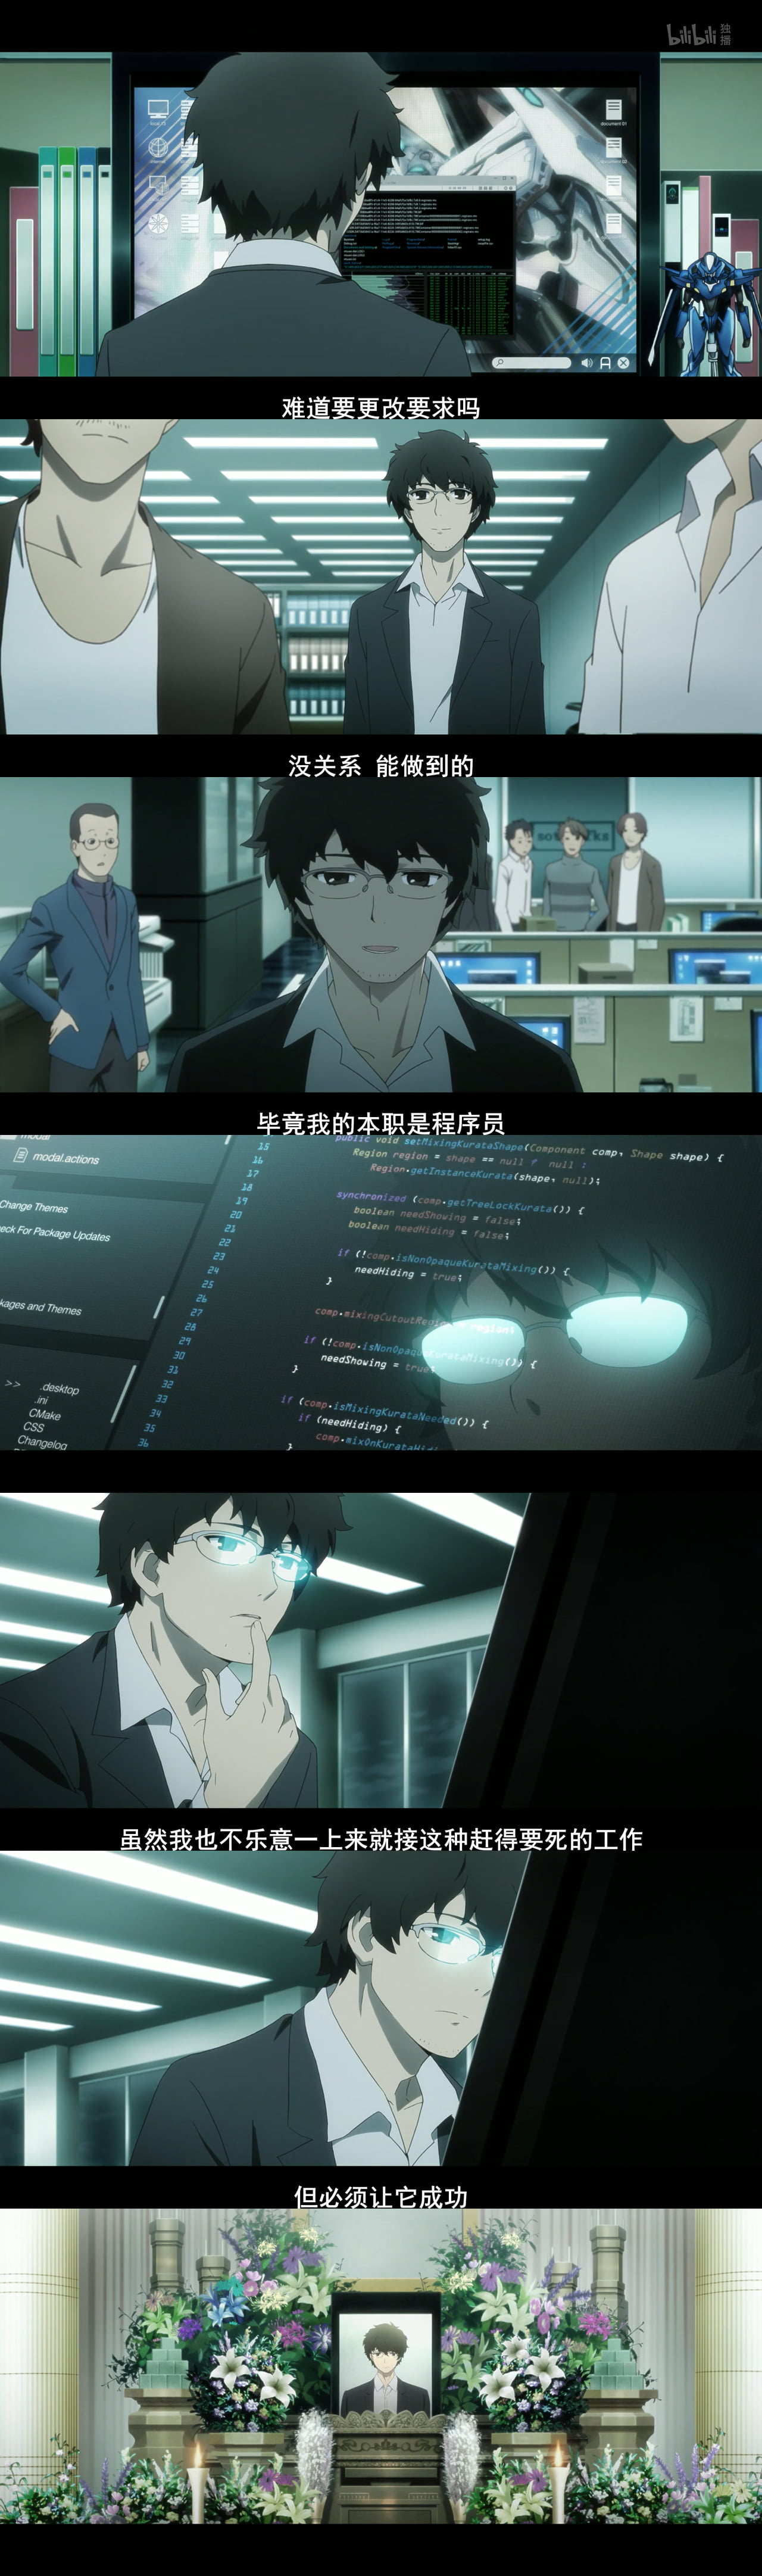 Online crop | black haired anime man character collage, programmers